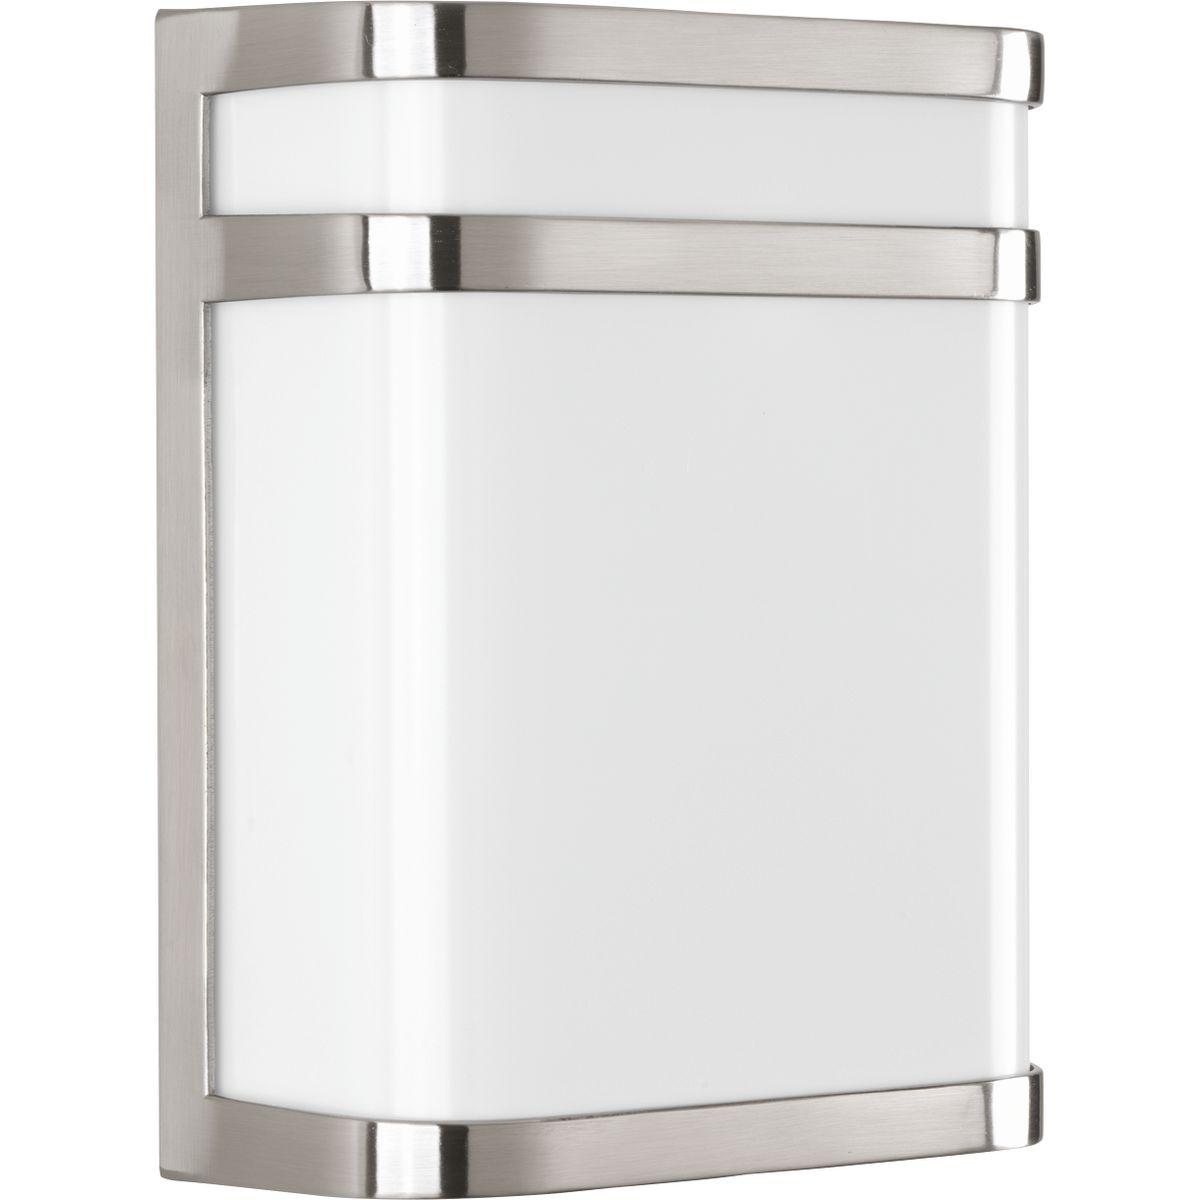 Hubbell P5801-0930K9 Clean lines are up front and center for these modern LED outdoor sconces. Valera features a die-cast aluminum frame and matte white, acrylic diffuser. Energy efficient LED source offers 3000K color temperature and 90+CRI output. Title 24 compliant. One-li